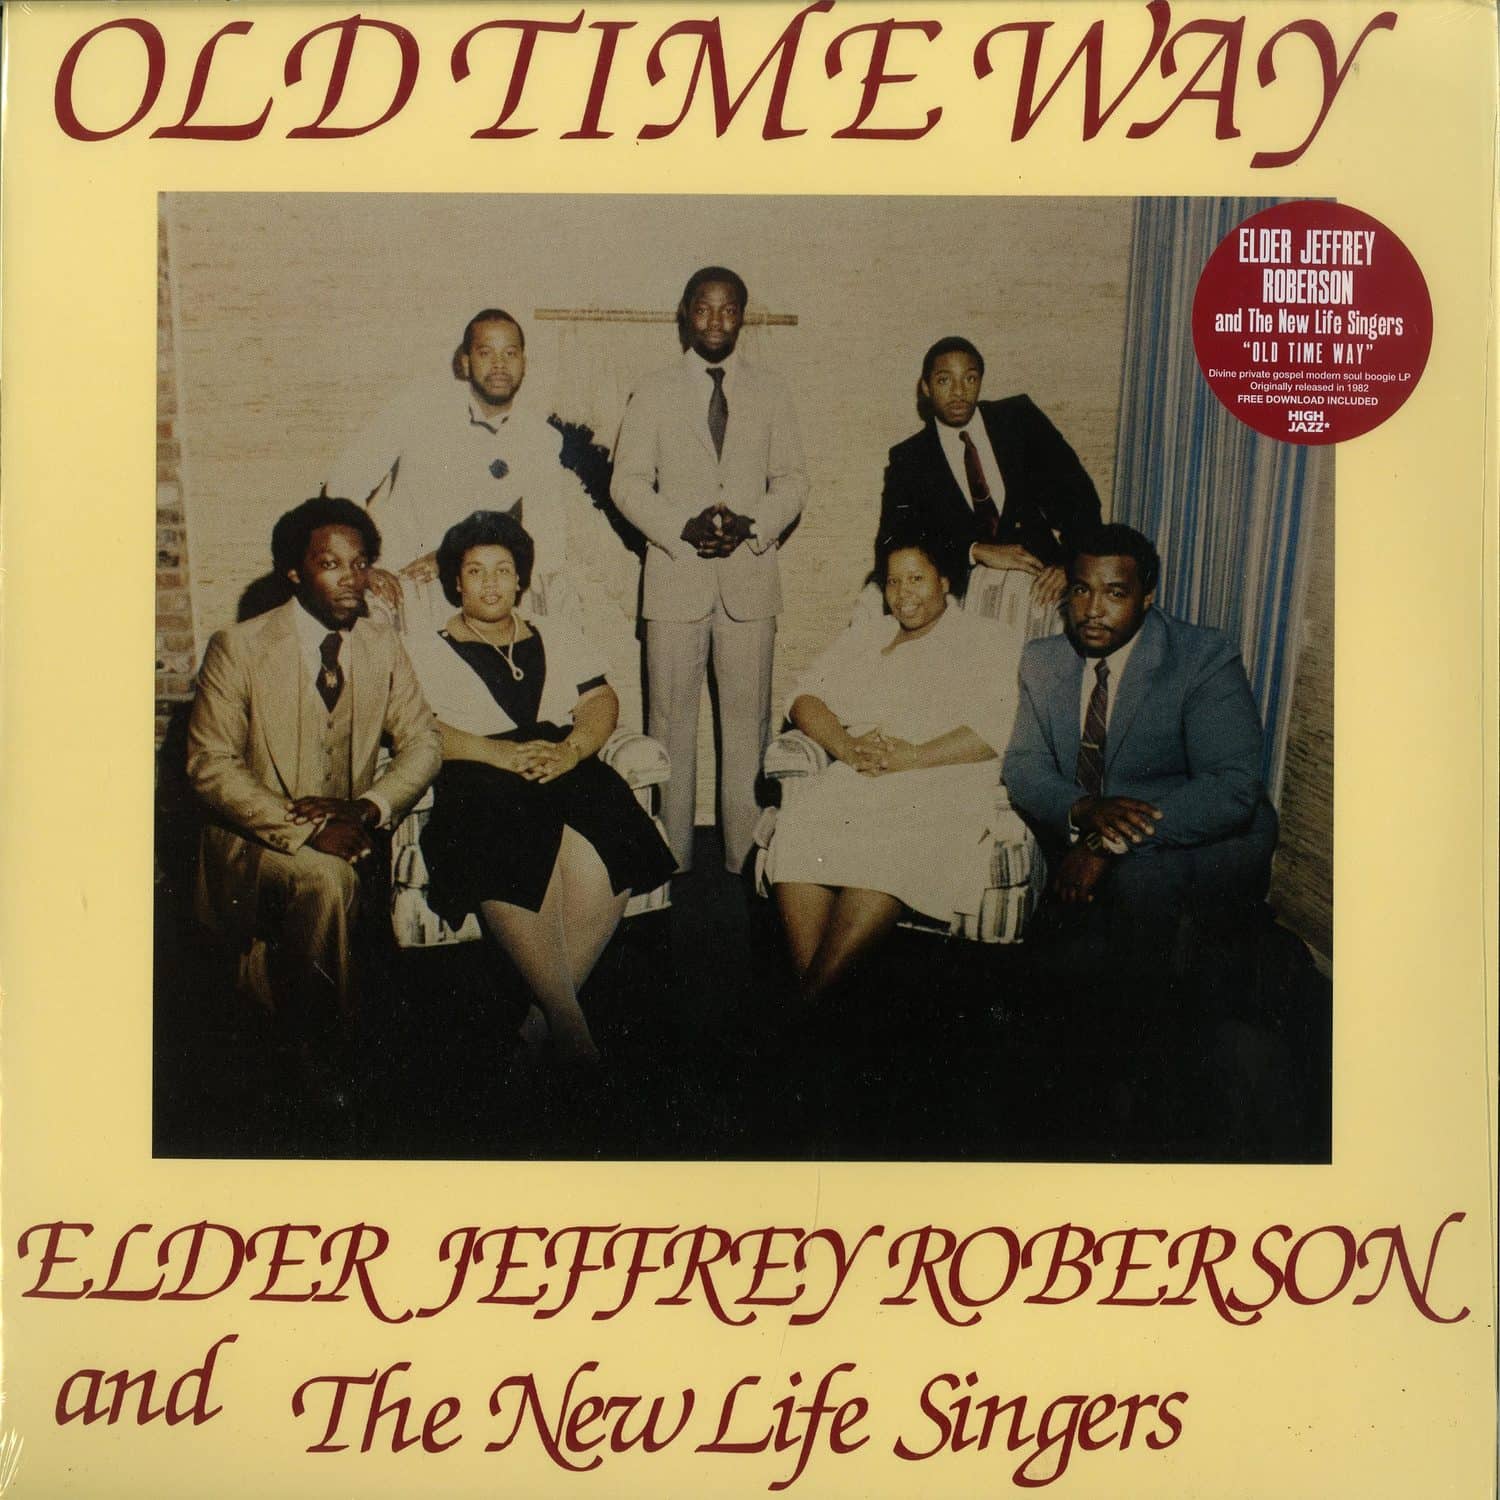 Elder Jeffrey Roberson And The New Life Singers - OLD TIME WAY 